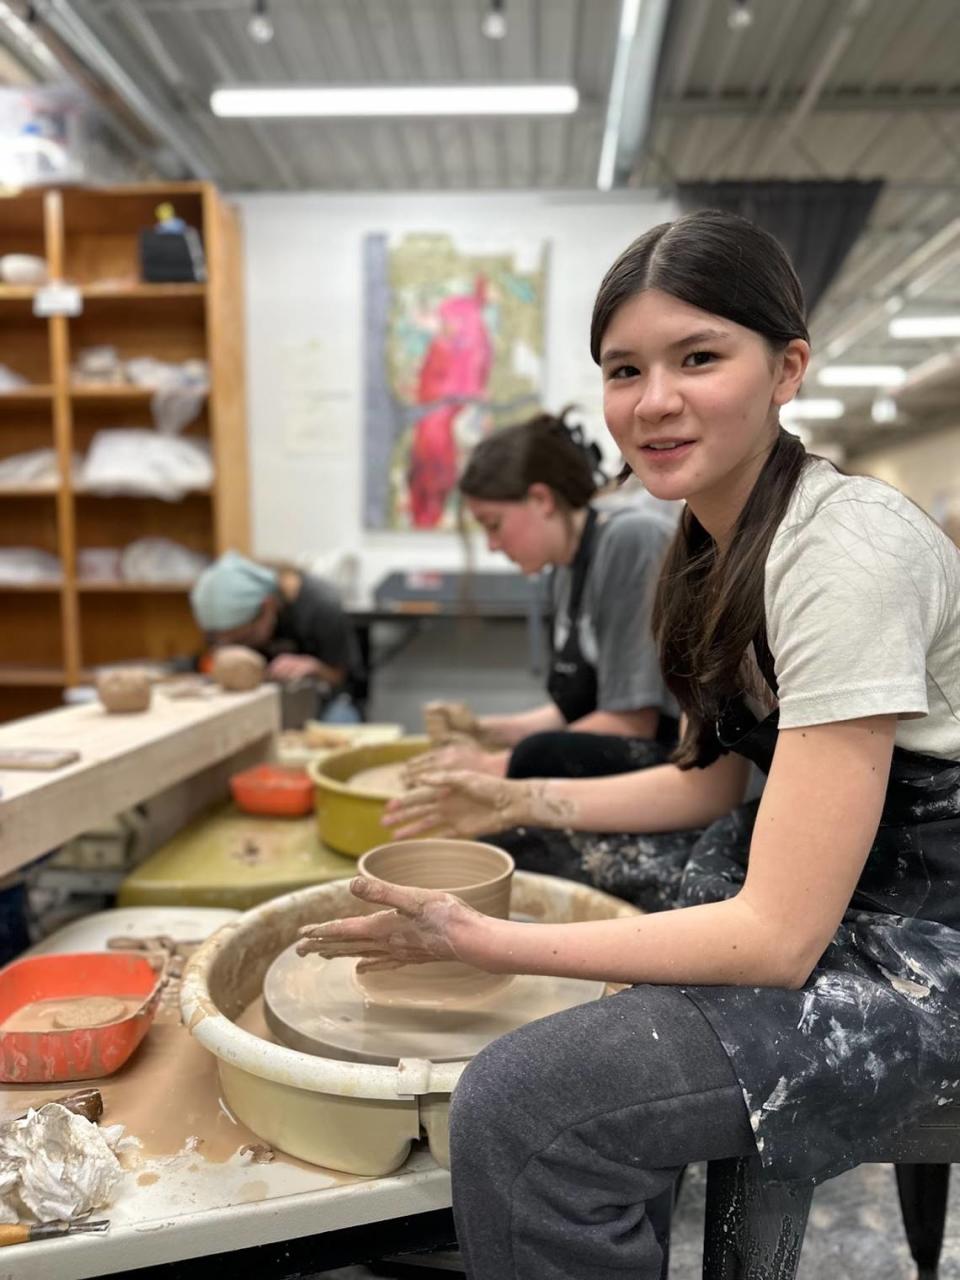 Clay nights allow people to experiment at Art School.